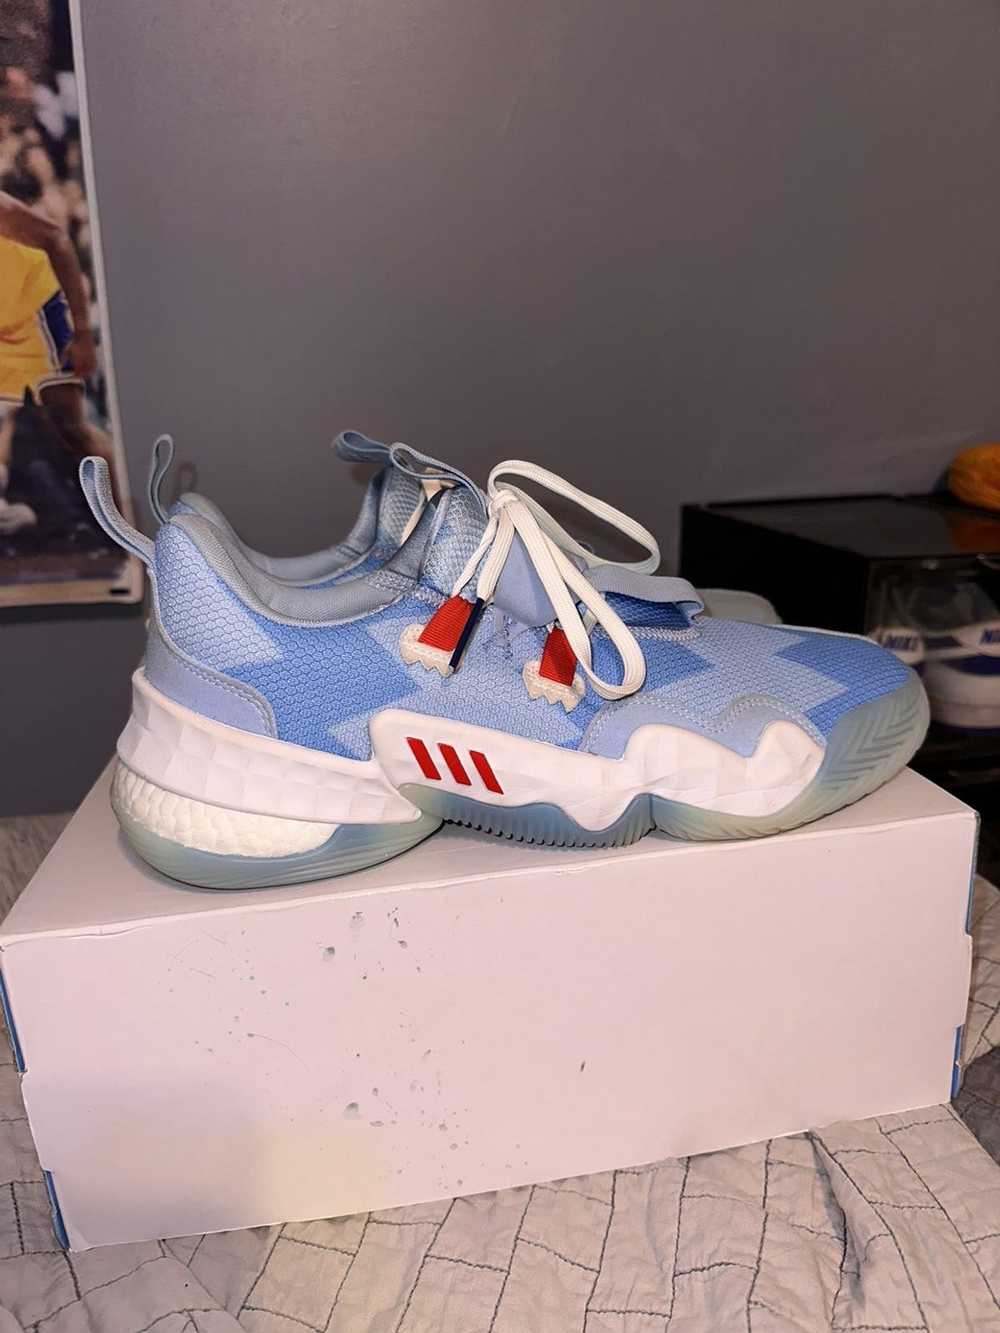 Sneakers Release – adidas Trae Young 1 “Peachtree